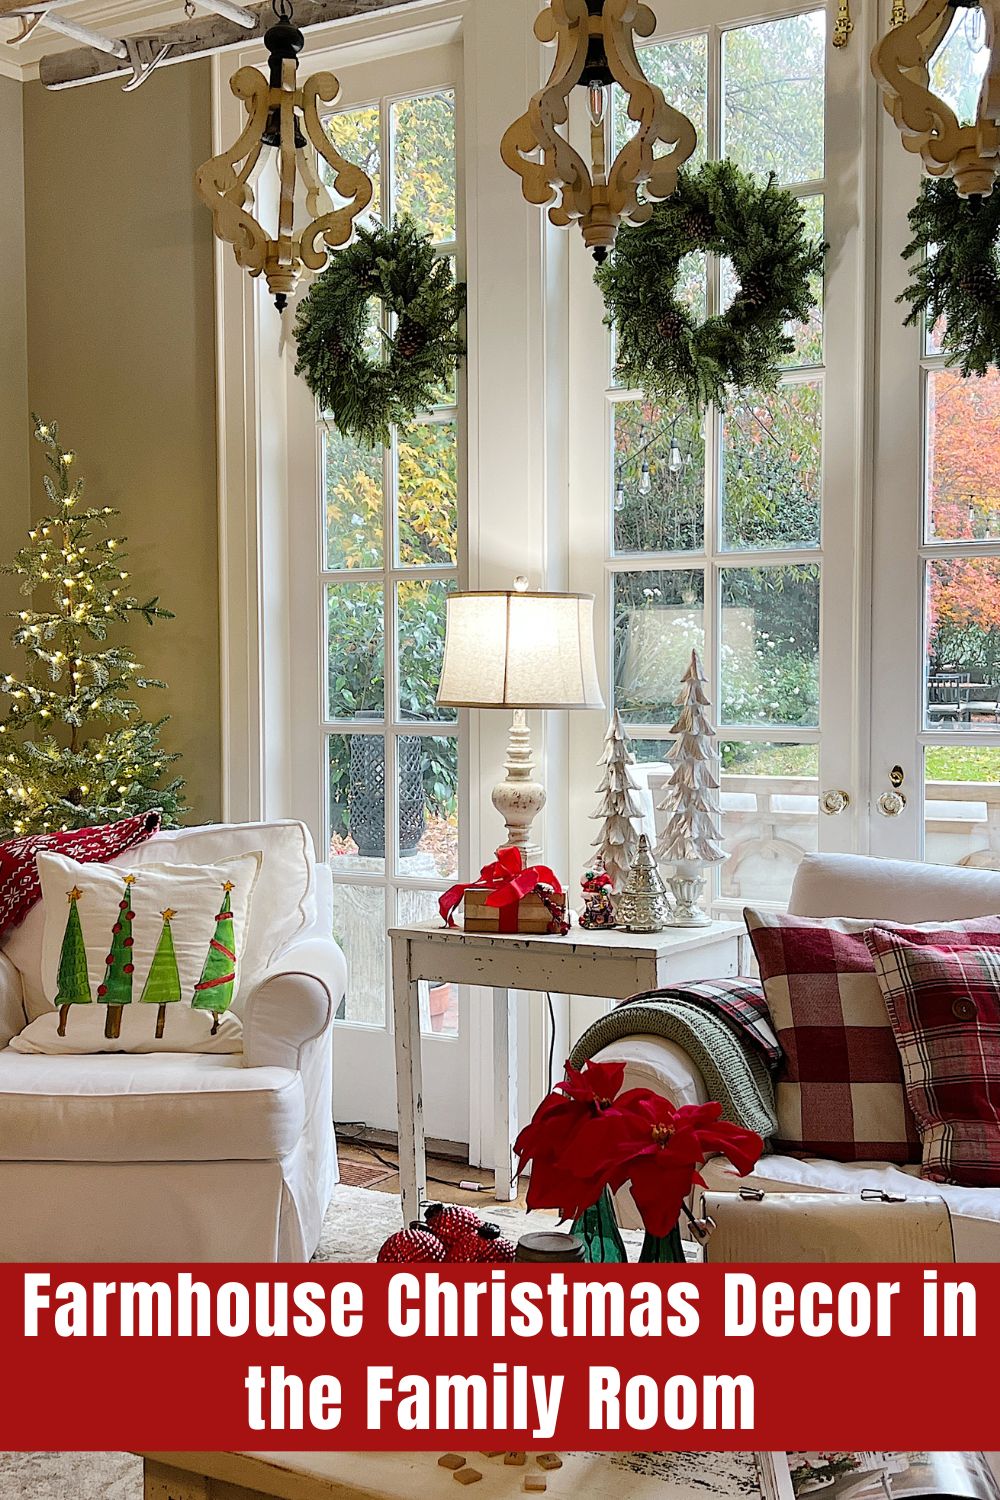 We finished decorating the house and this week I am going to be sharing every room. I love the farmhouse Christmas decor in the family room.